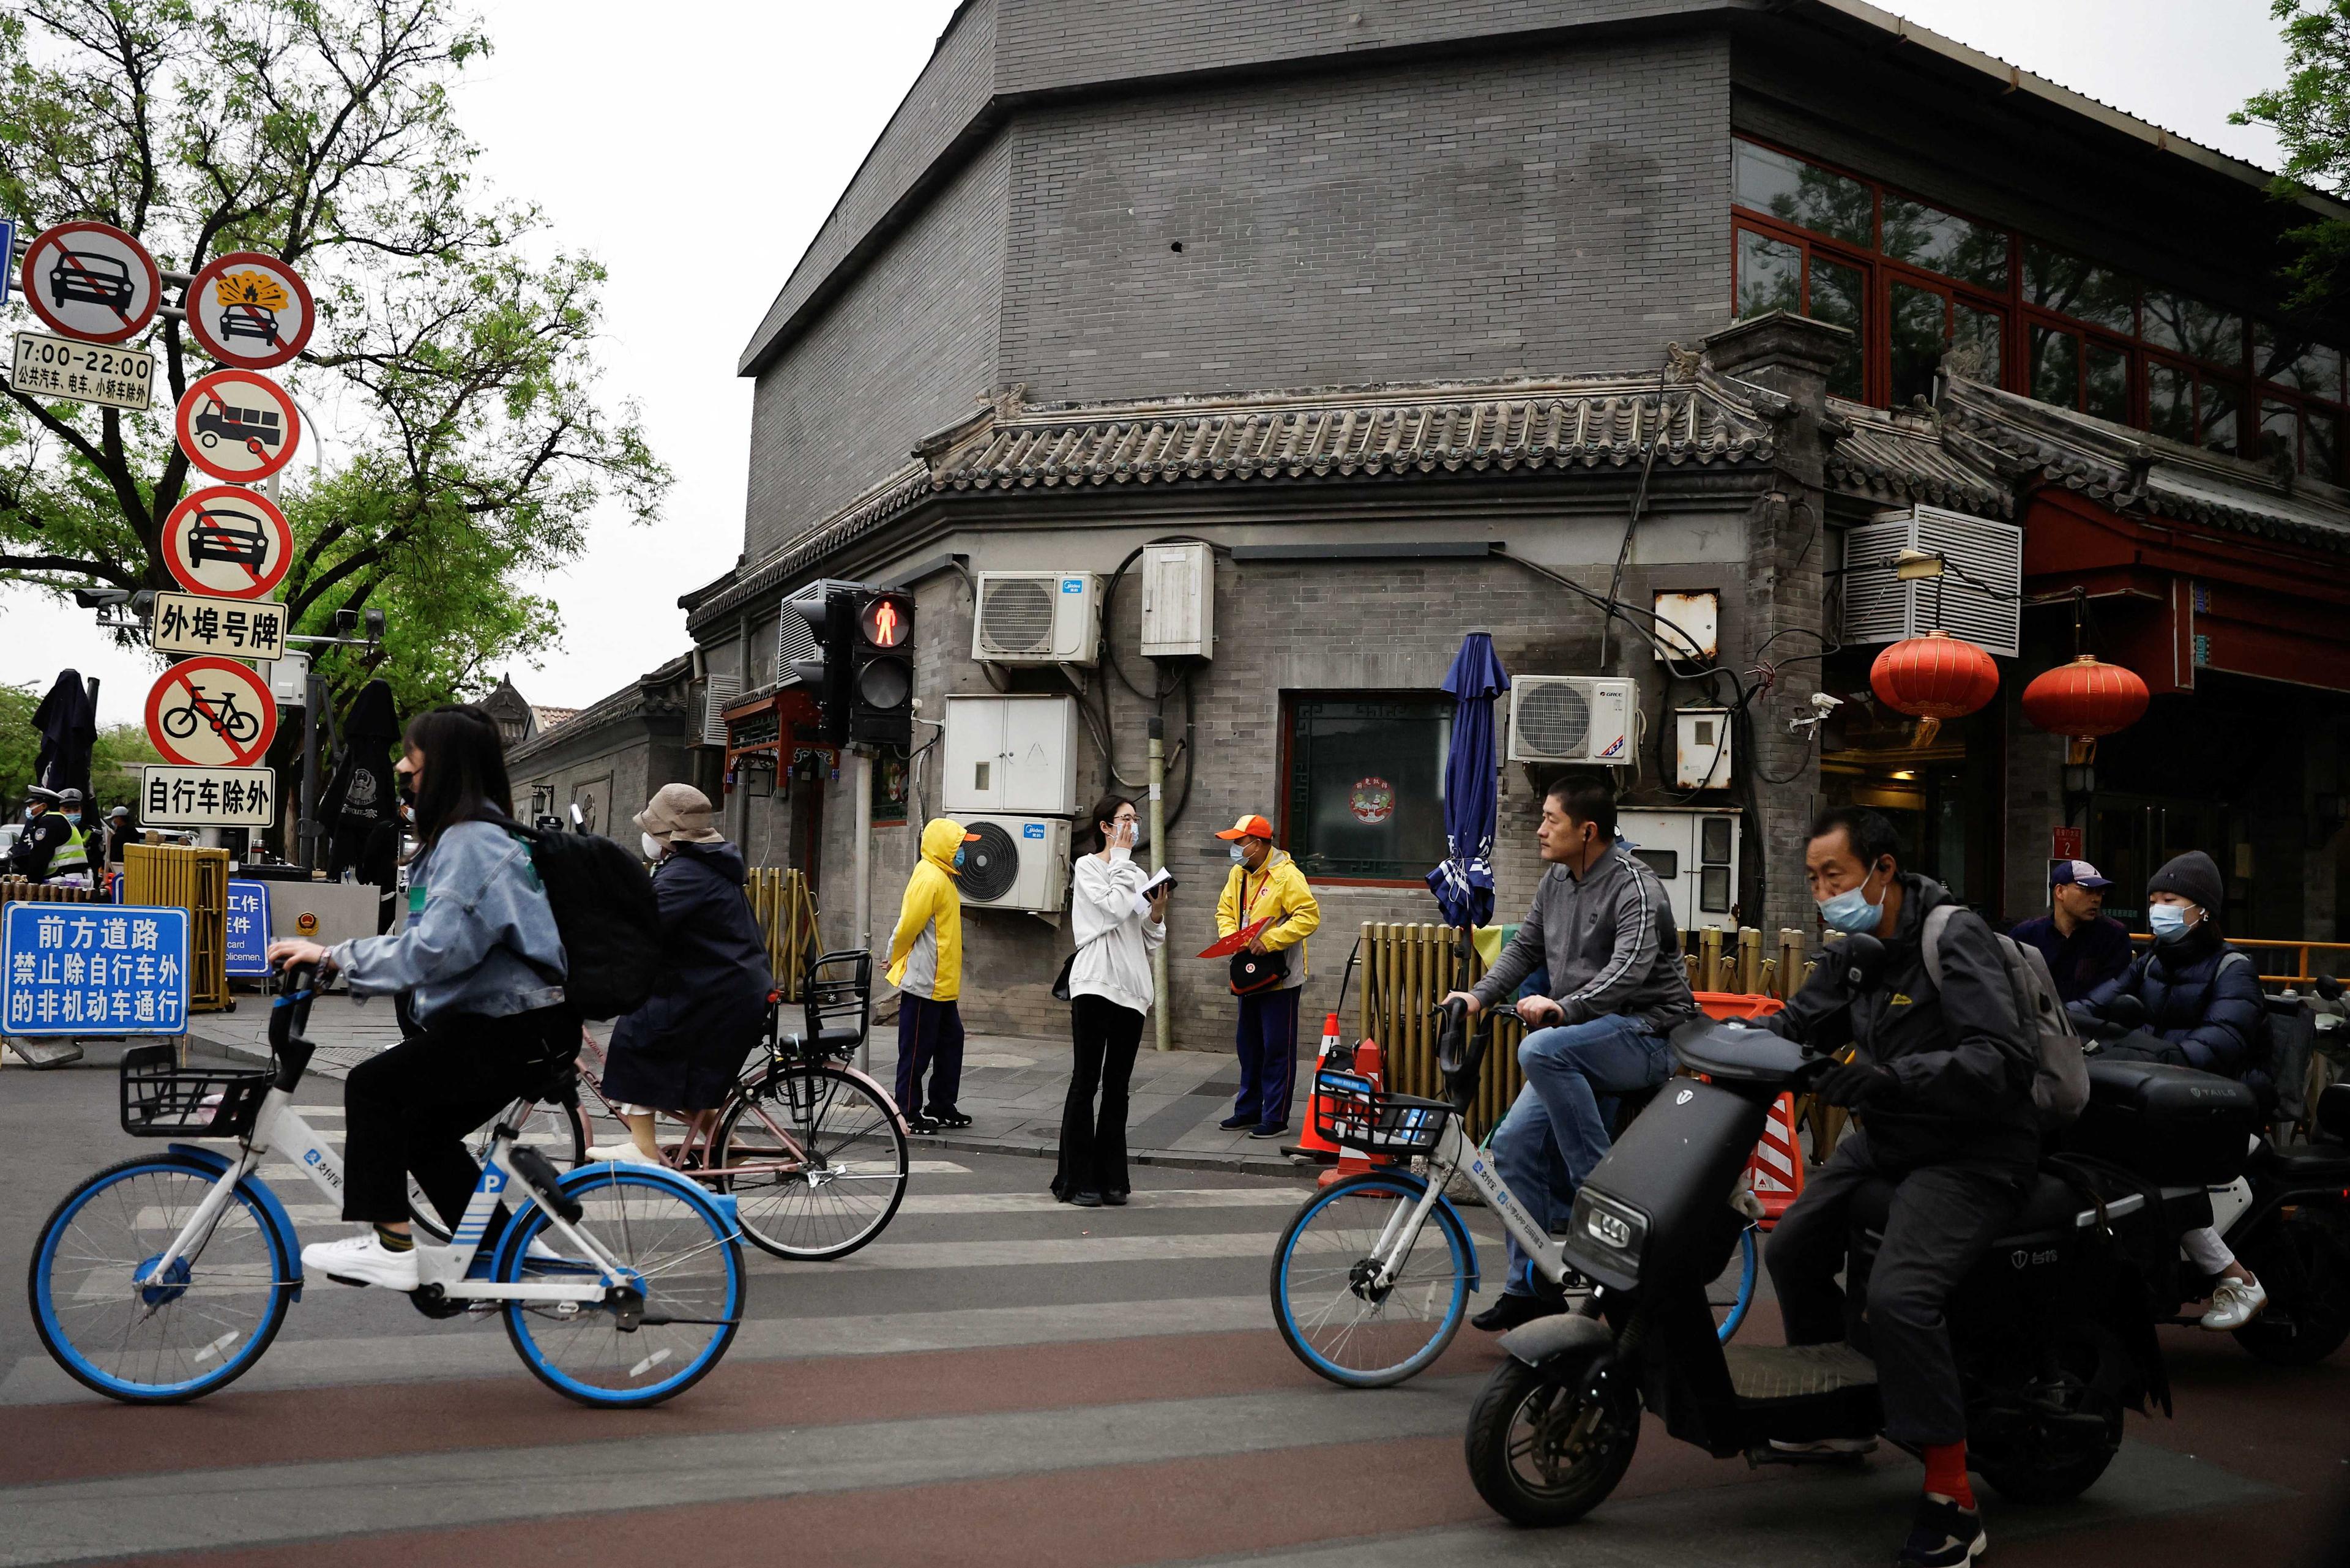 People ride bicycles and scooters on a street during morning rush hour, in Beijing, China April 20. Photo: Reuters